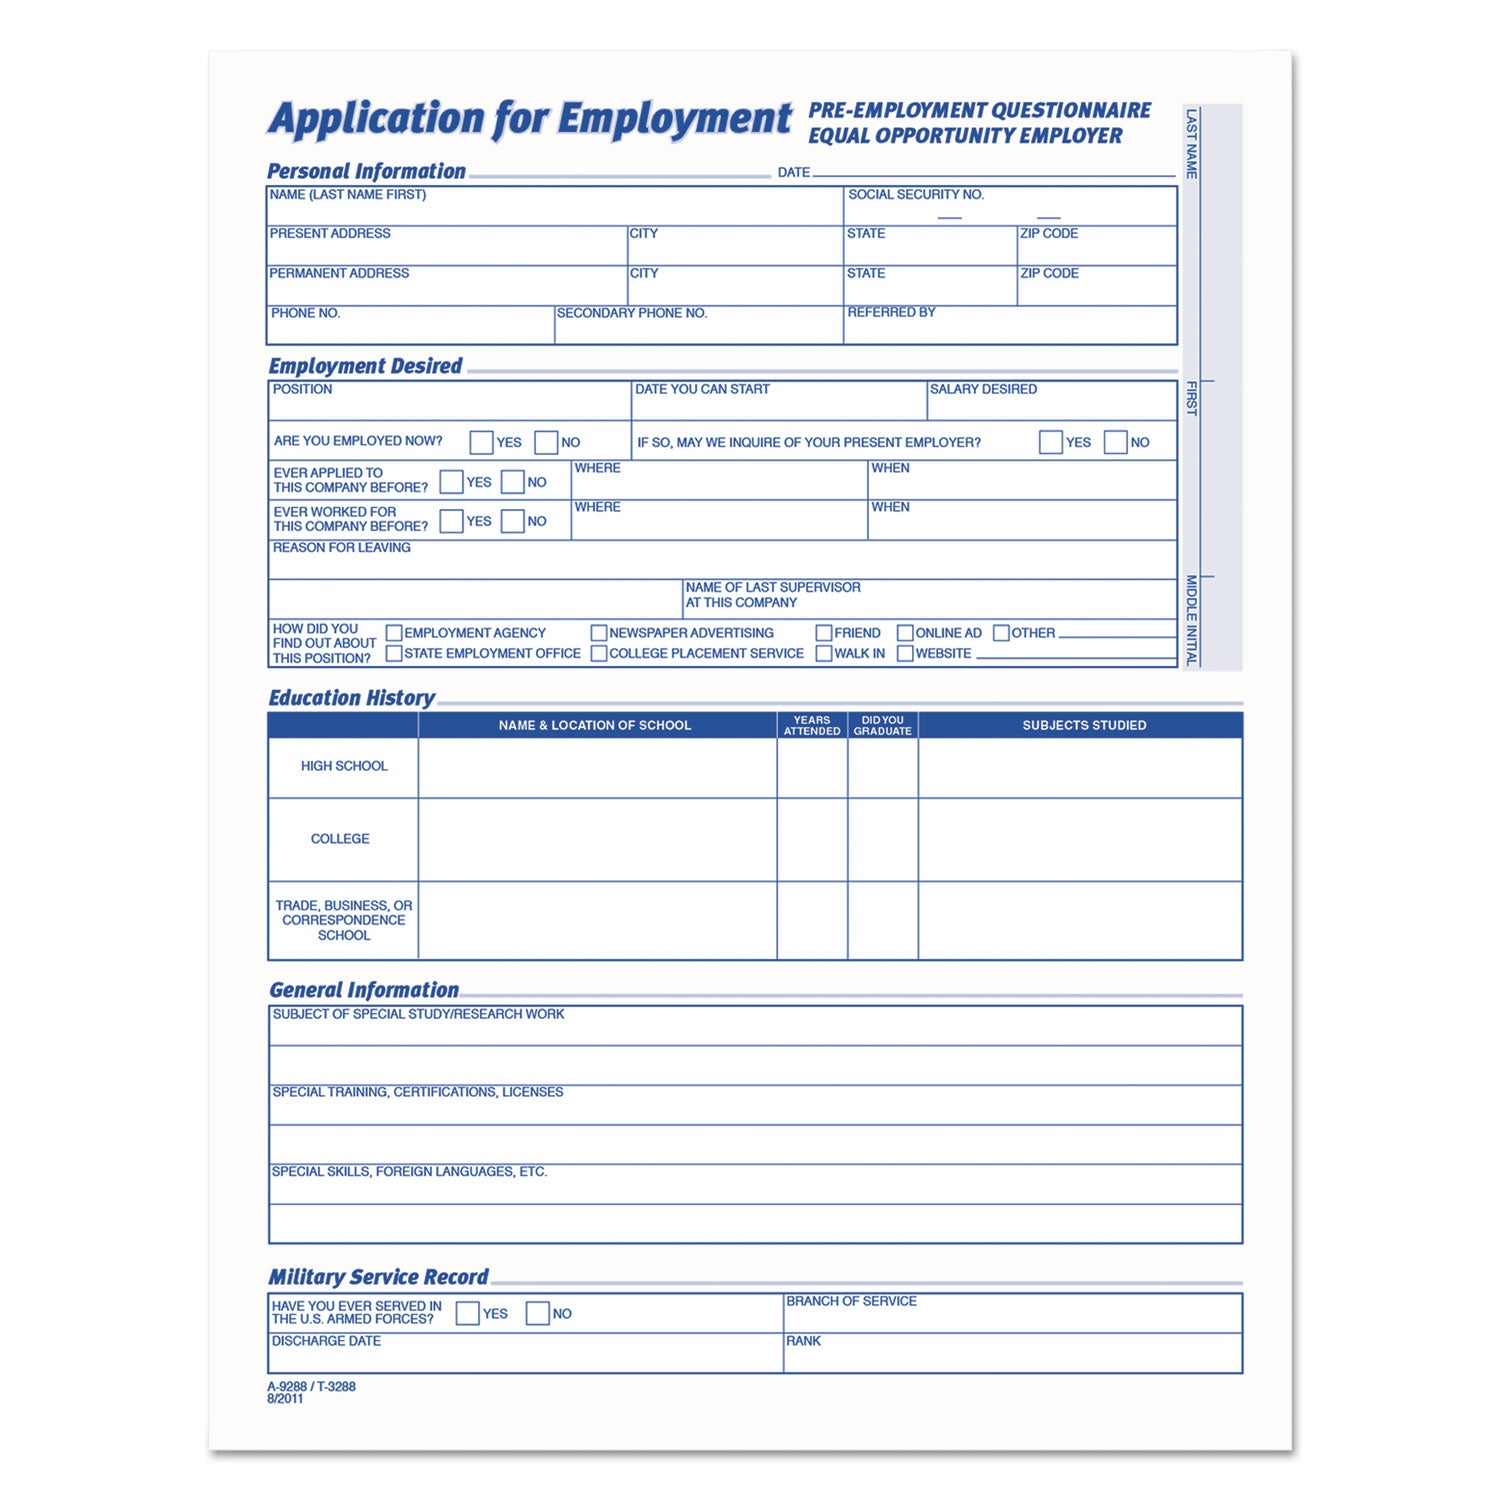 Comprehensive Employee Application Form, One-Part (No Copies), 17 x 11, 25 Forms Total - 